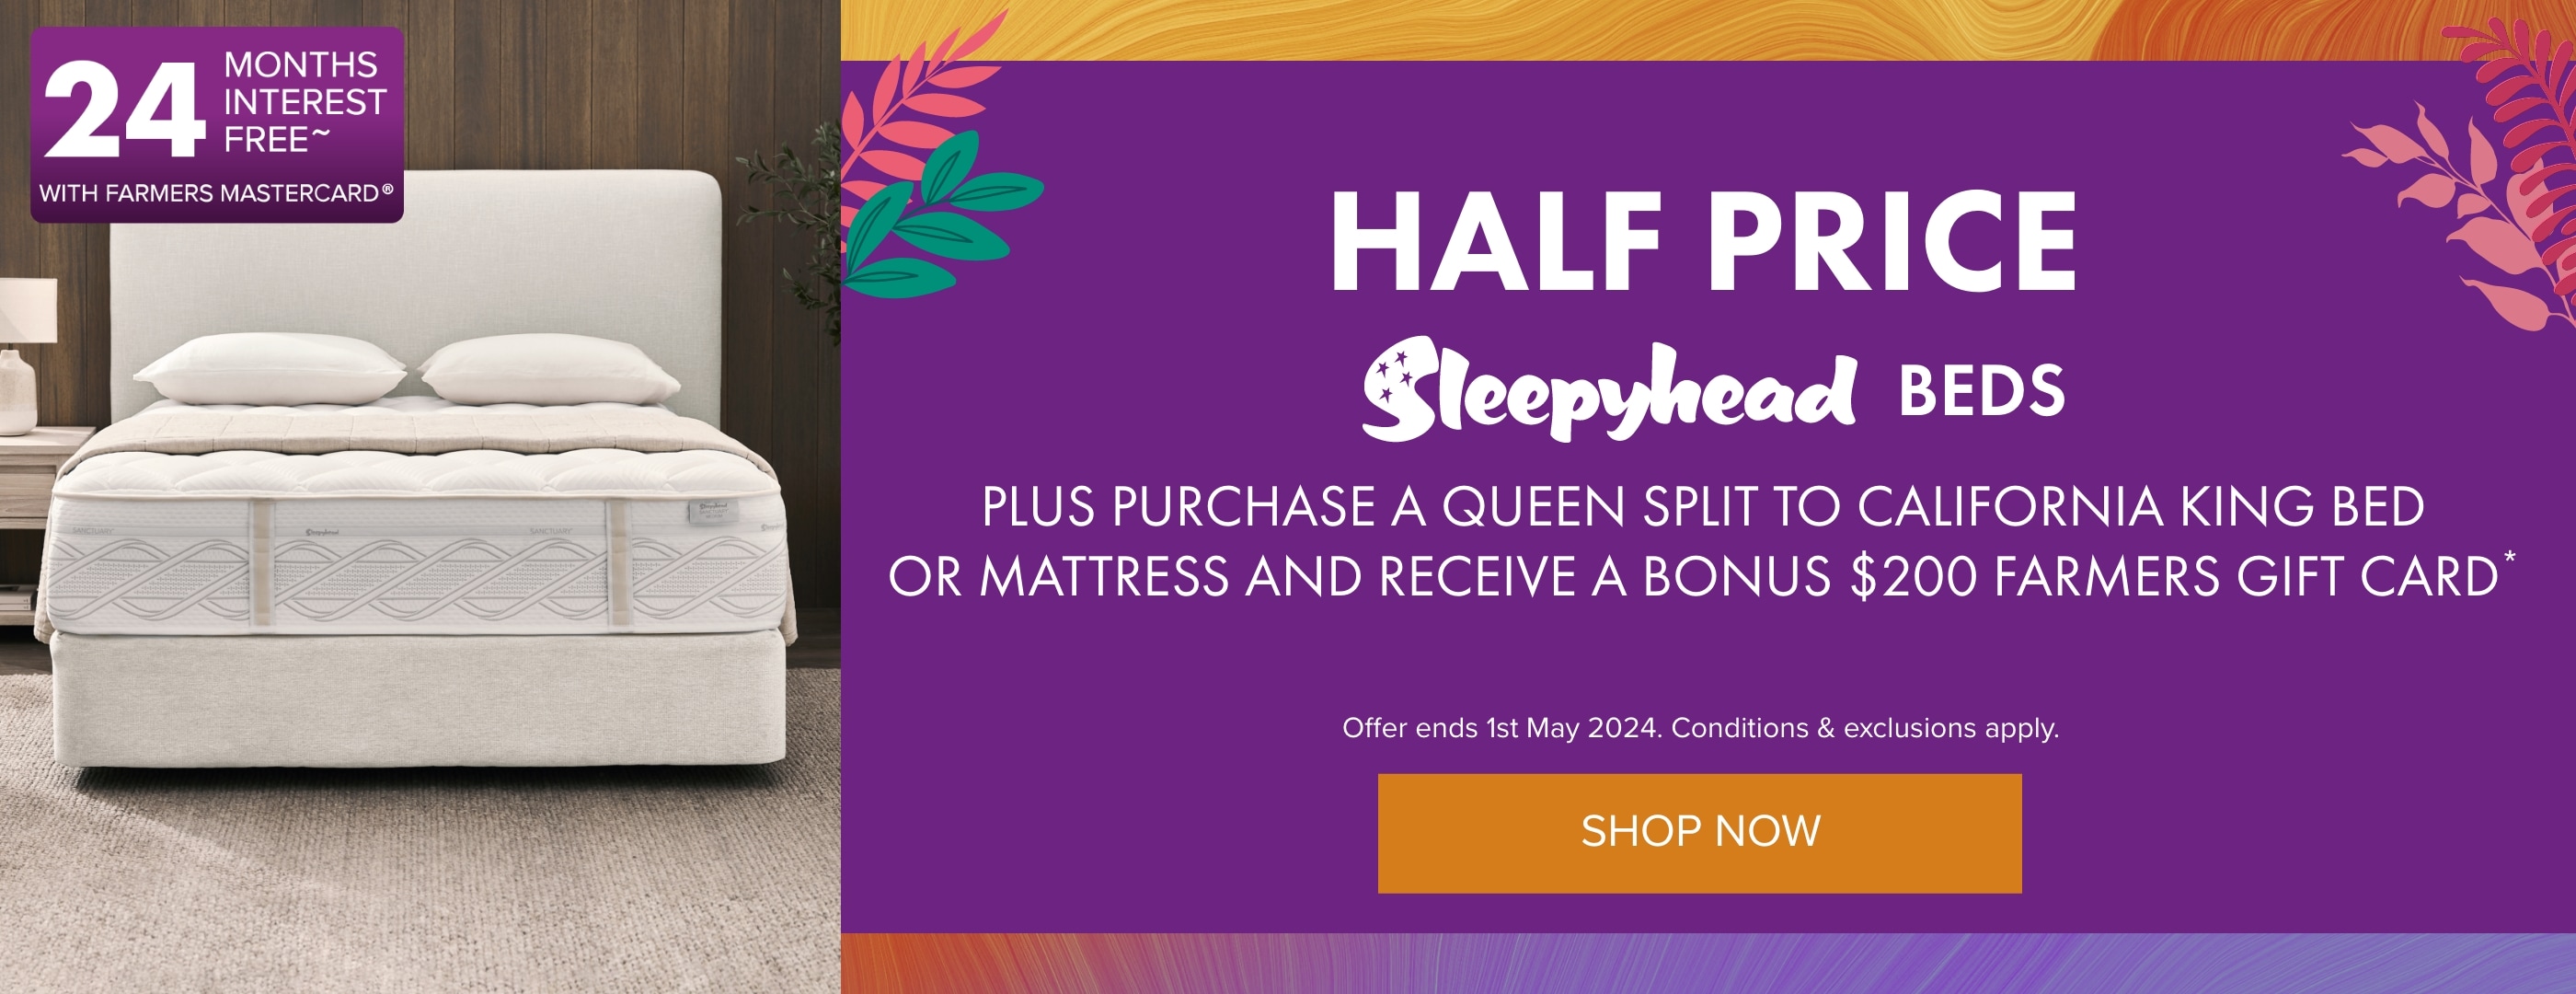 Half Price on Sleepyhead Beds Plus Purchase a Queen Split to California King bed or mattress and receive a Bonus $200 Farmers Gift Card*